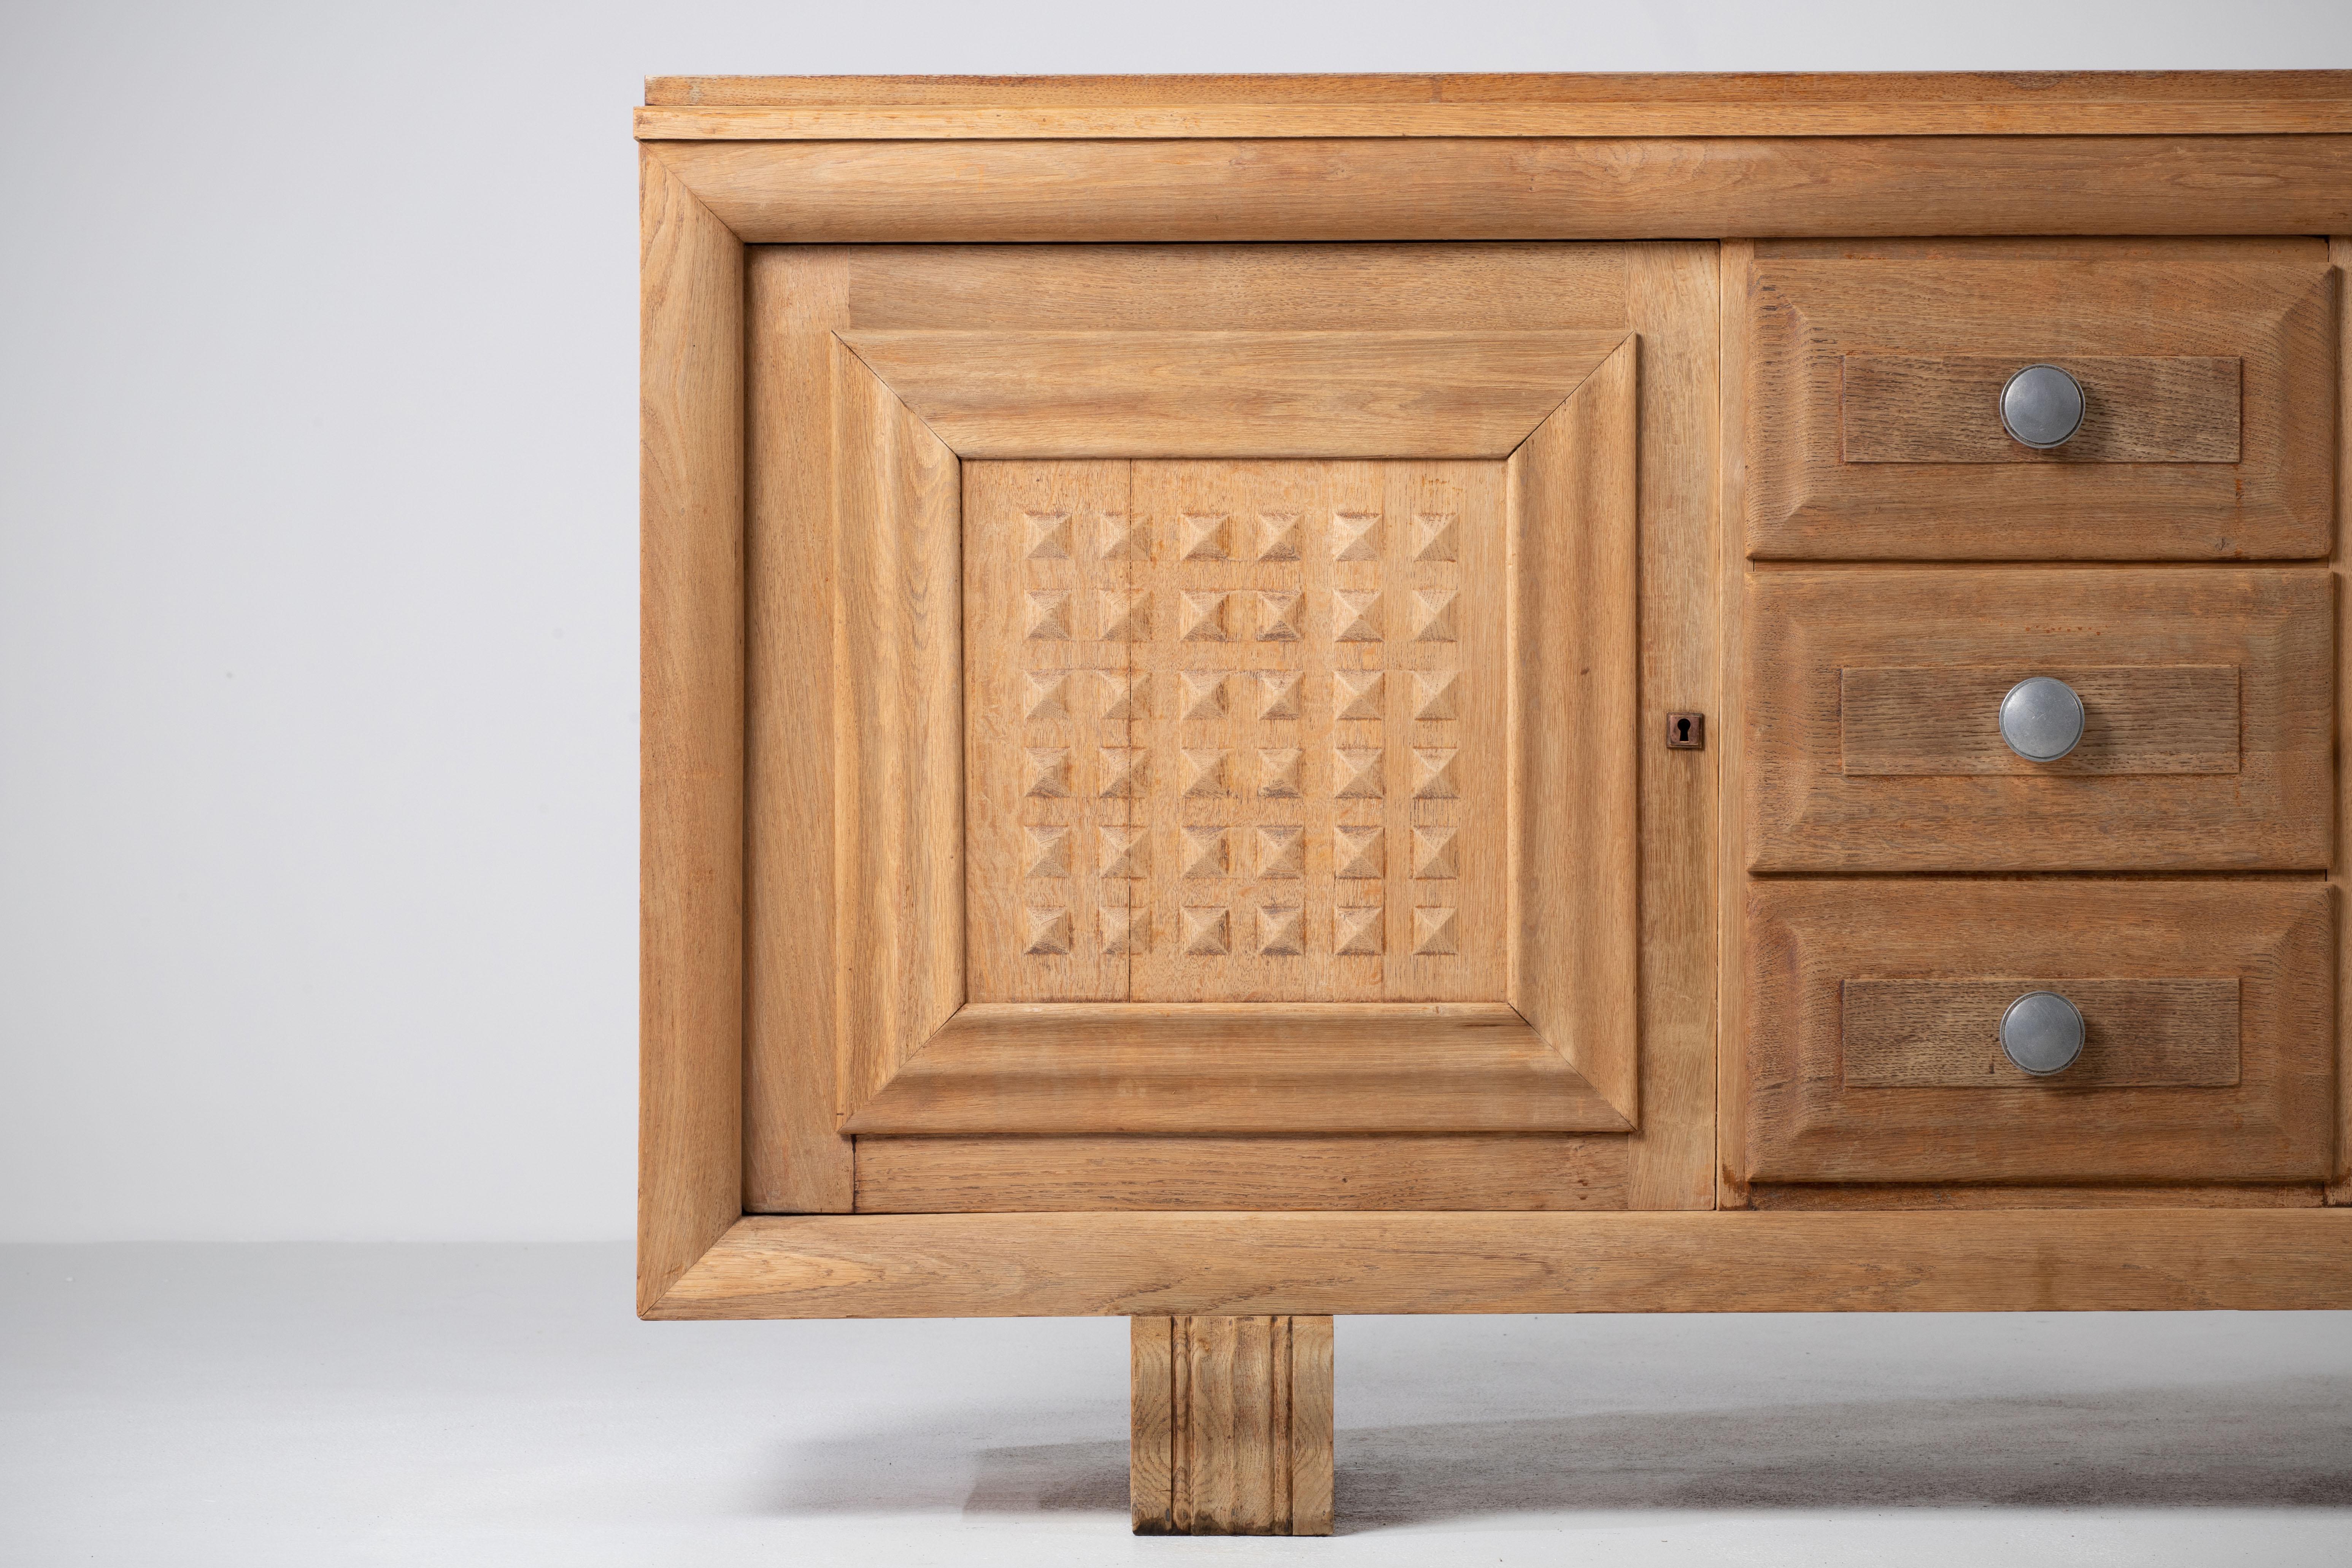 Credenza, solid oak, France, 1940s.
Large Art Deco Brutalist sideboard. 
The credenza consists of three central drawers and three storage facilities and covered with very detailed designed doors. 
The refined wooden structures on the doors create